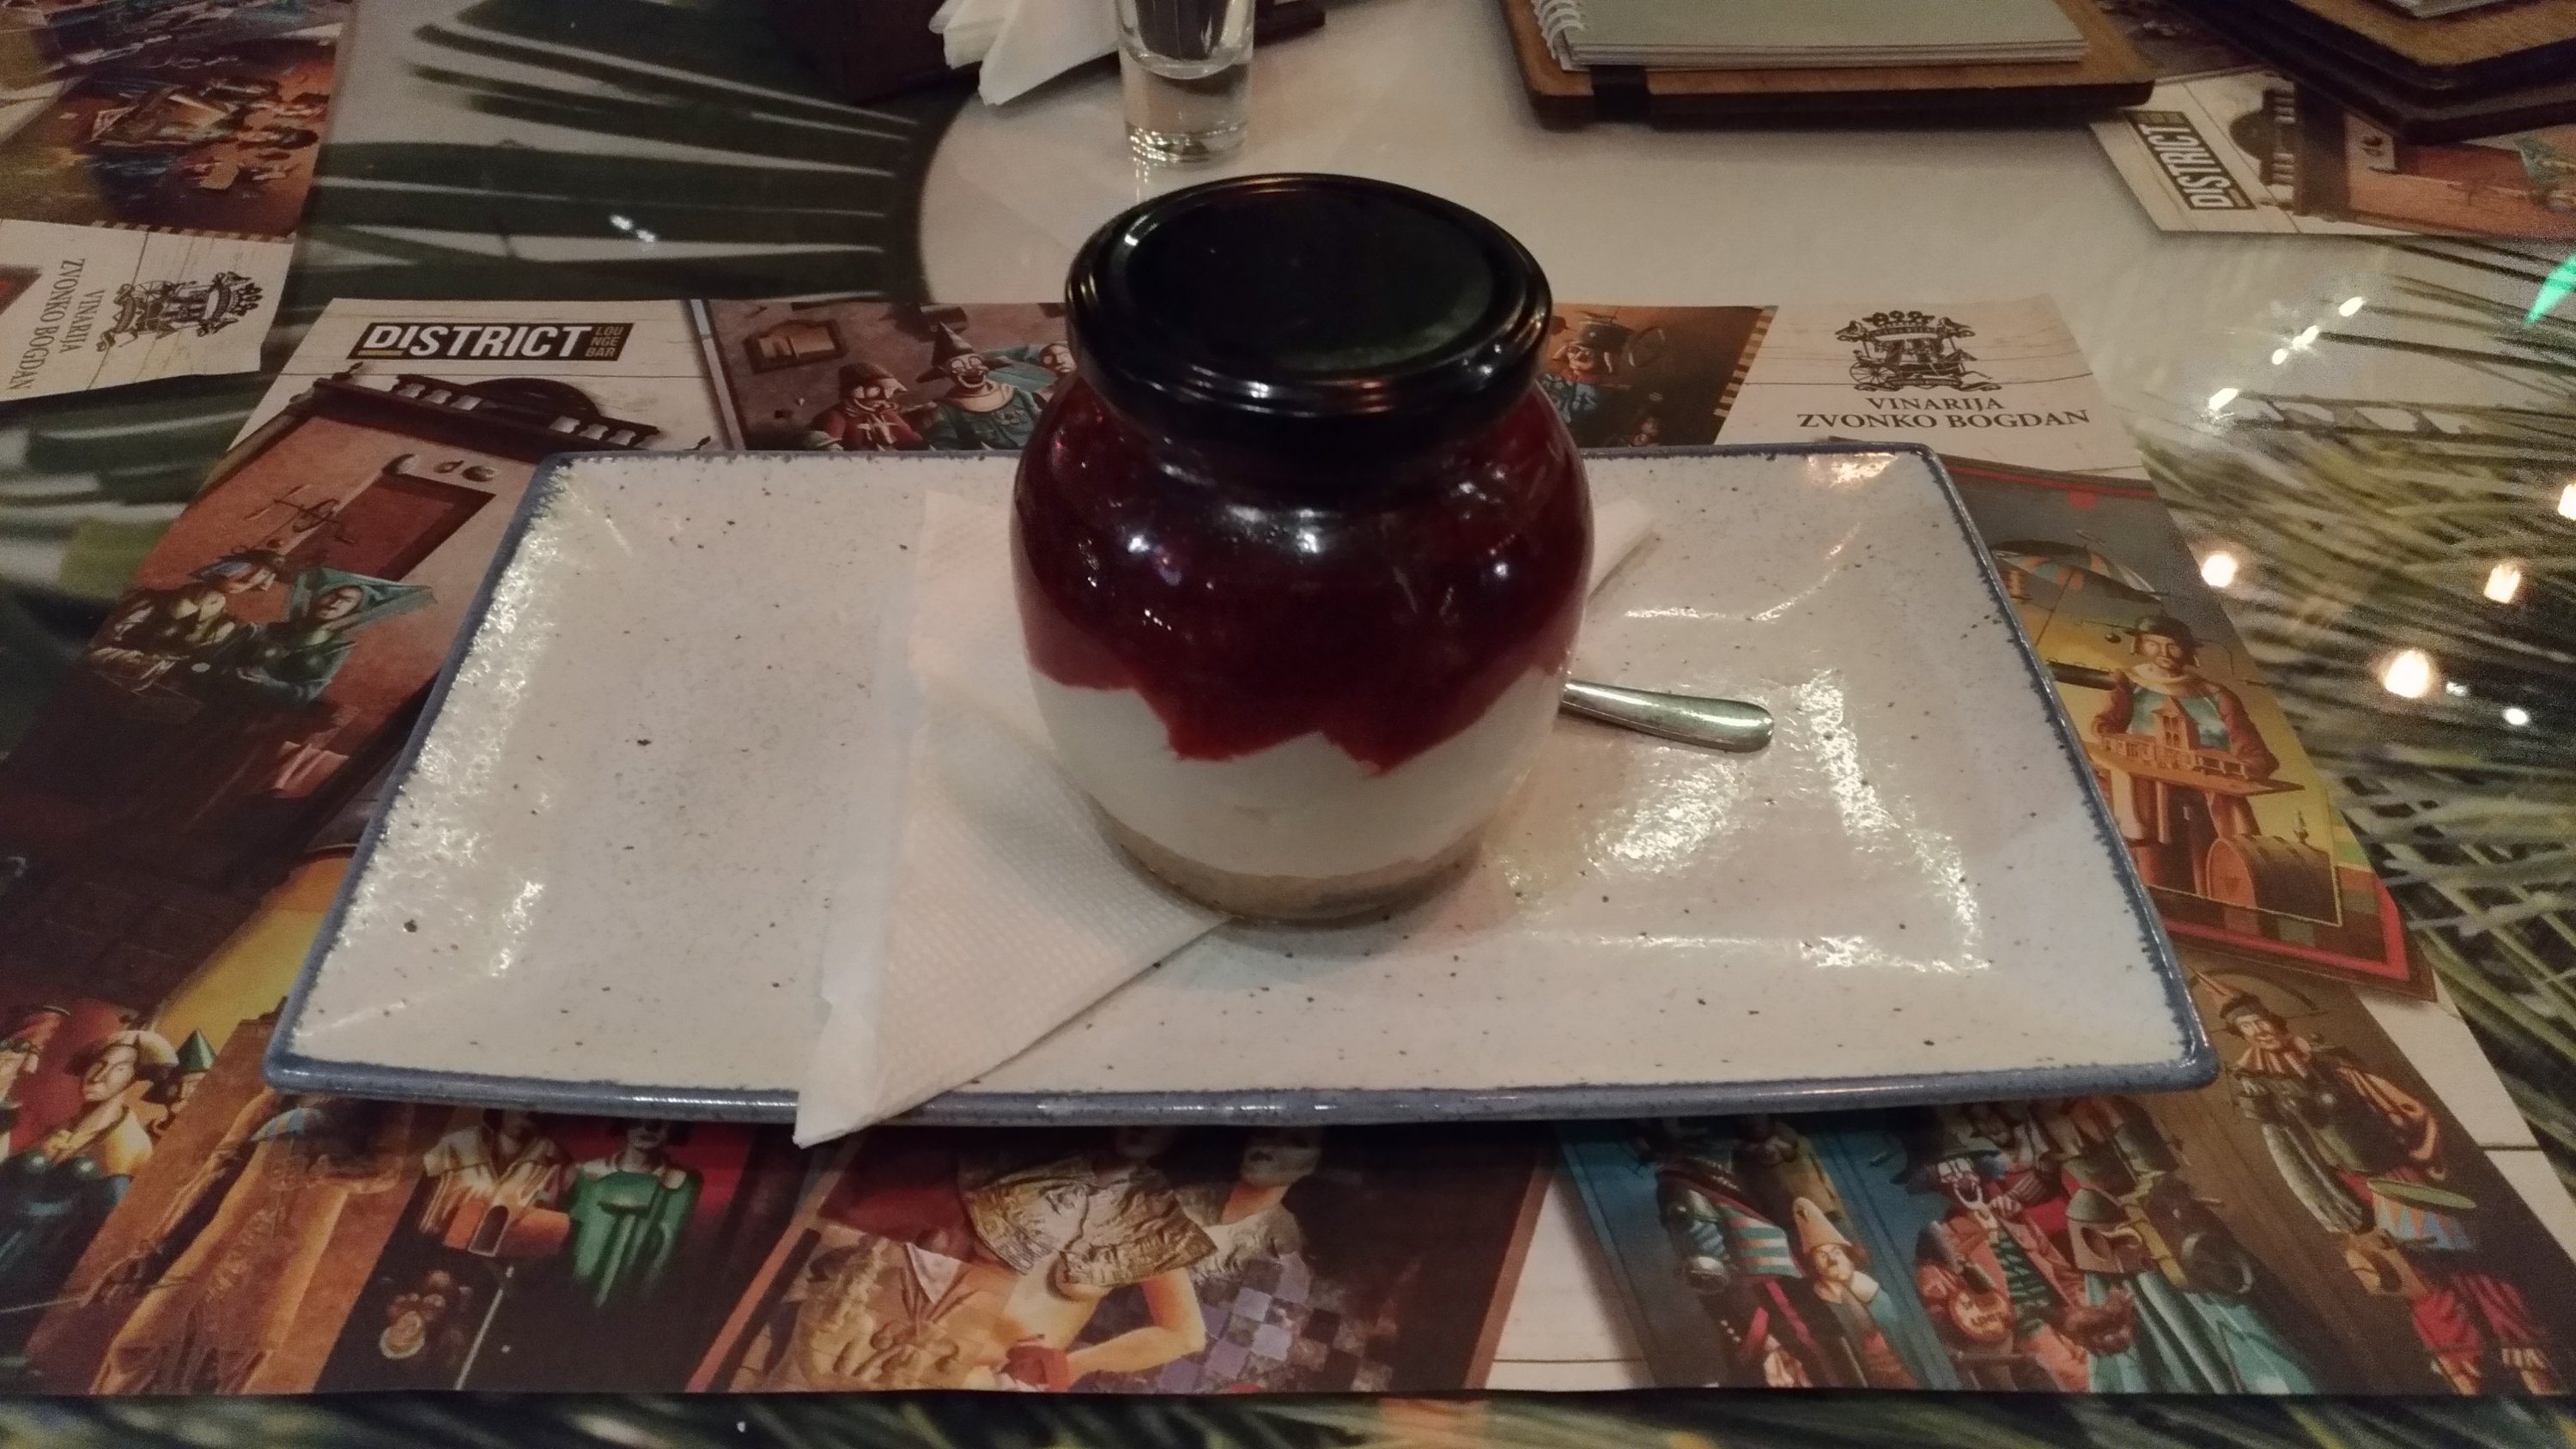 One of many cheesecakes I ate!